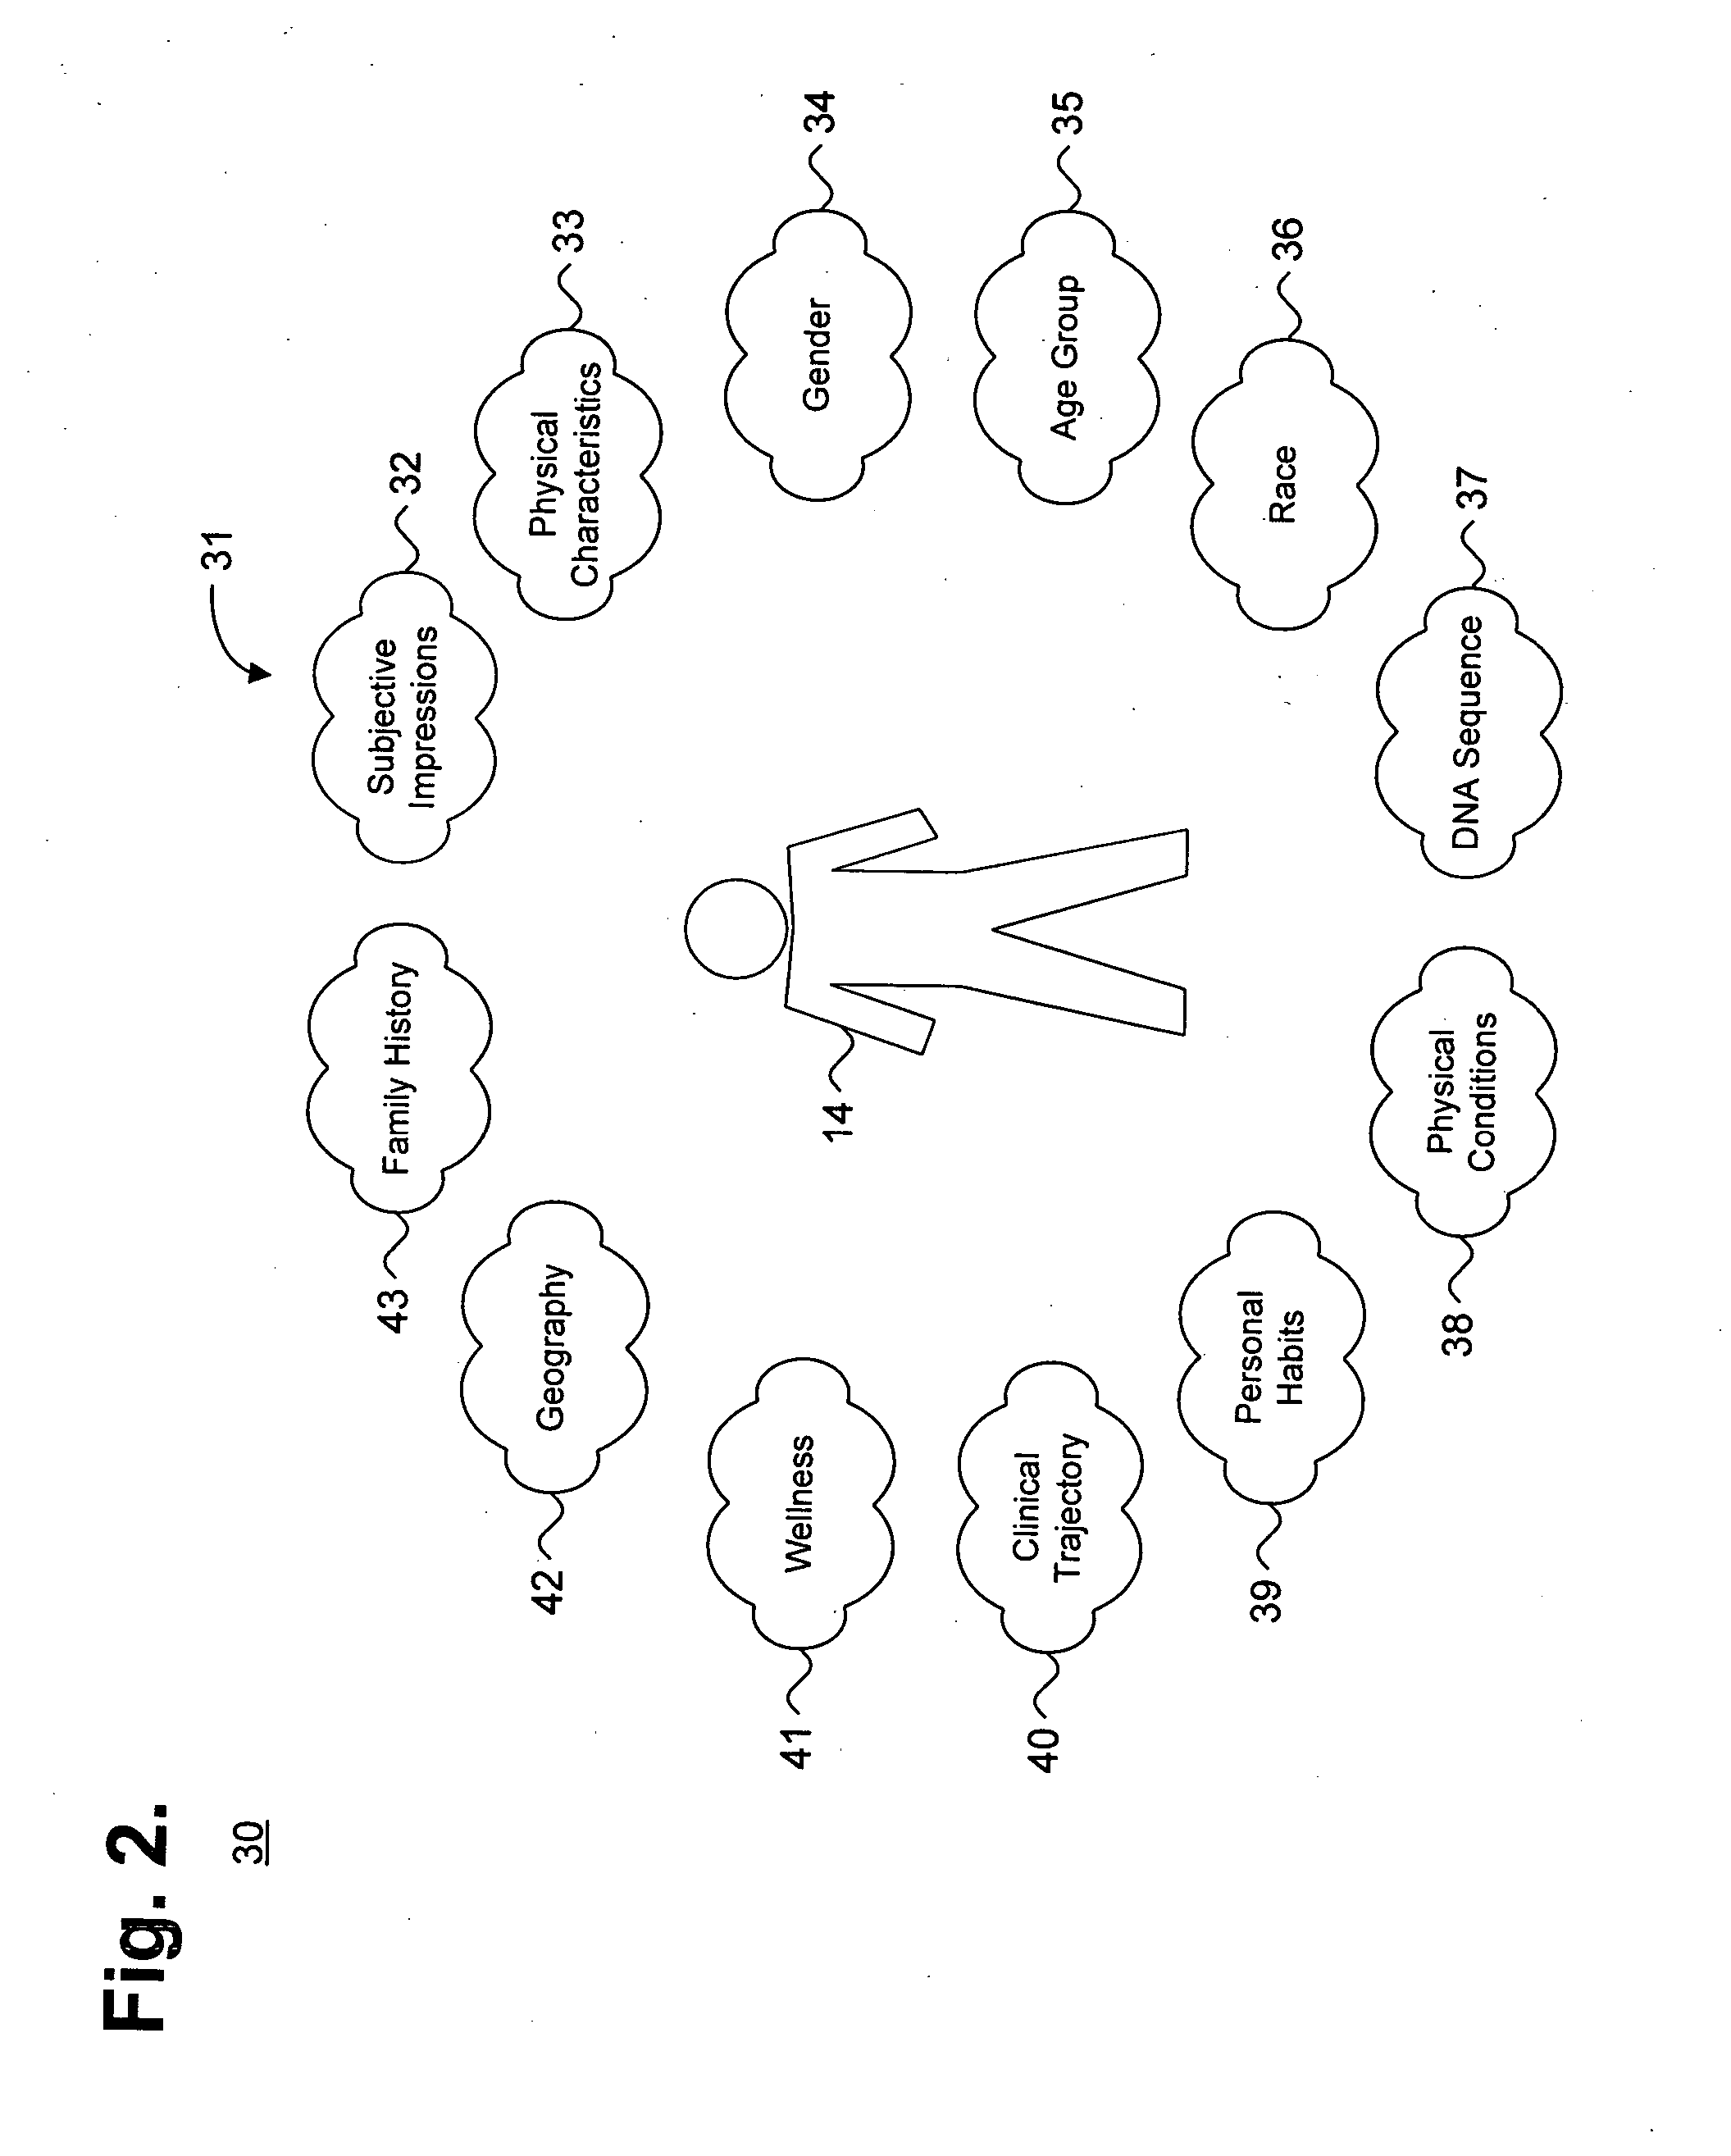 System and method for providing goal-oriented patient management based upon comparative population data analysis